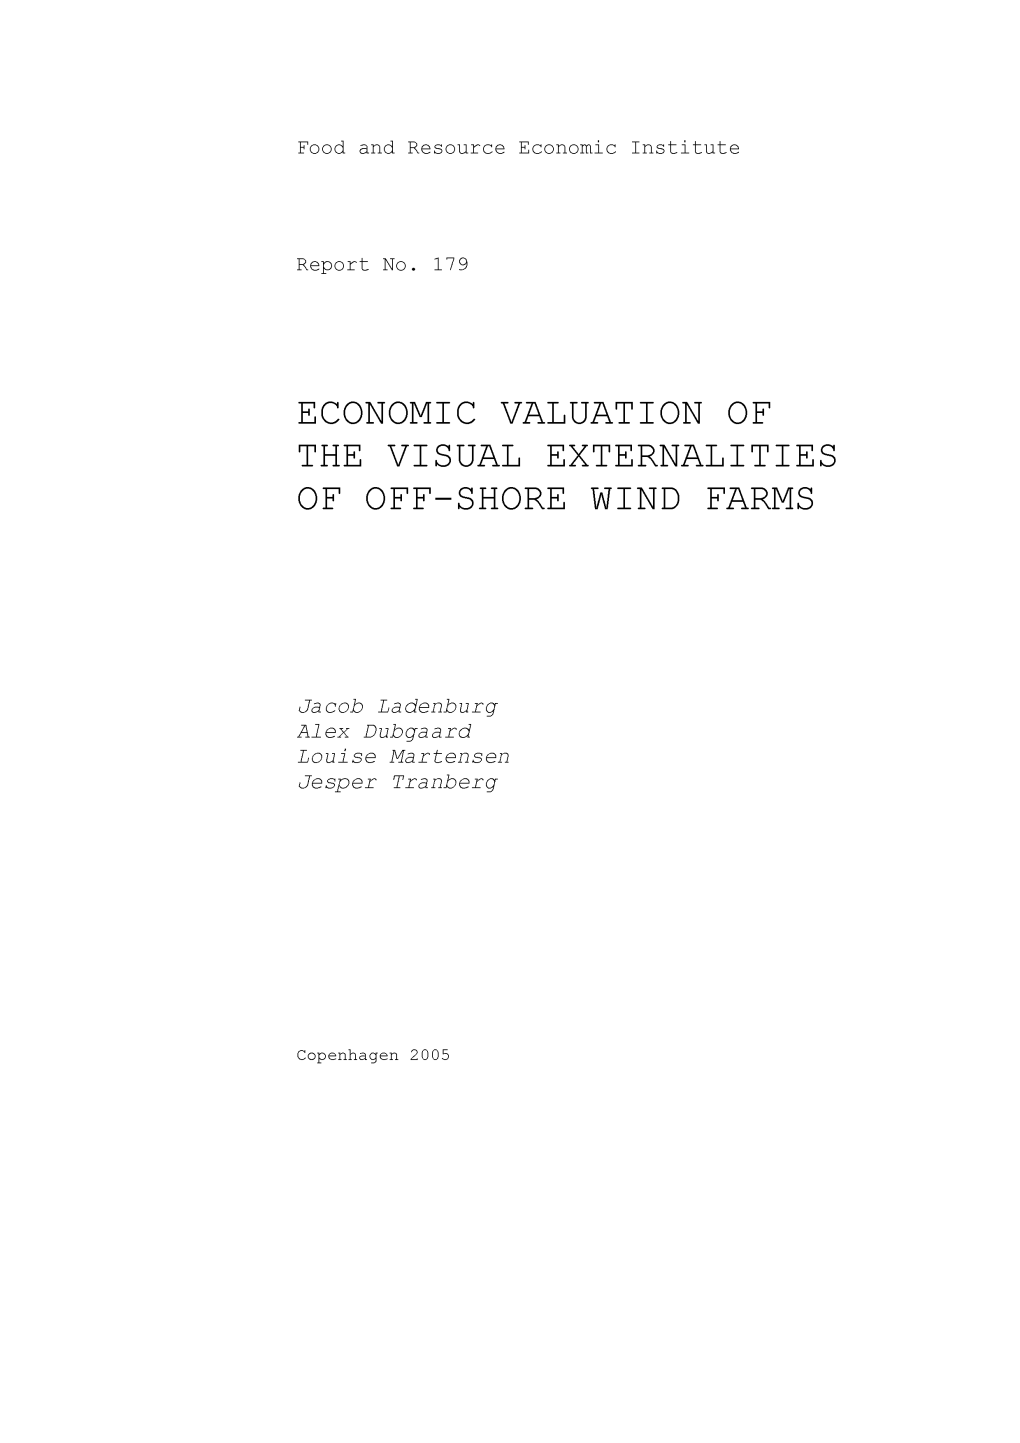 Economic Valuation of the Visual Externalities of Off-Shore Wind Farms